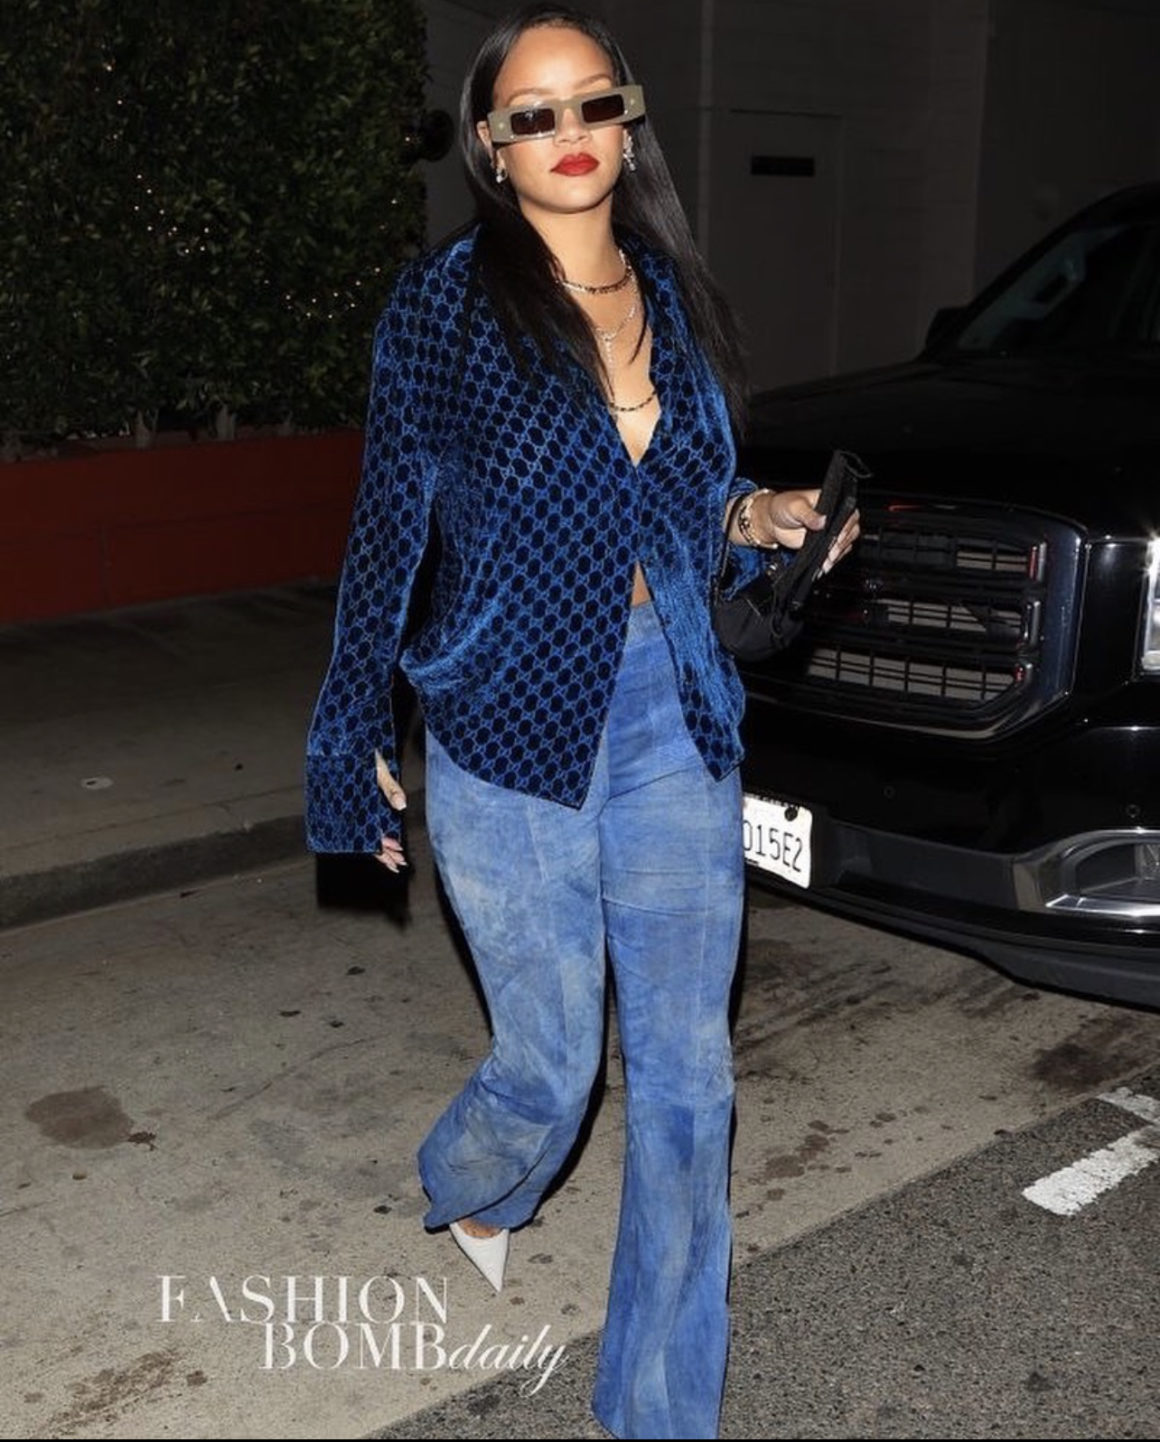 Rihanna Gives Us the Blues in a Good Way Wearing Vintage Gucci Velvet Monogram Shirt and SPRWMN Blue Suede Flared Pants Paired With Vintage Fendi Black Mini Bag and Amina Muaddi White Pumps